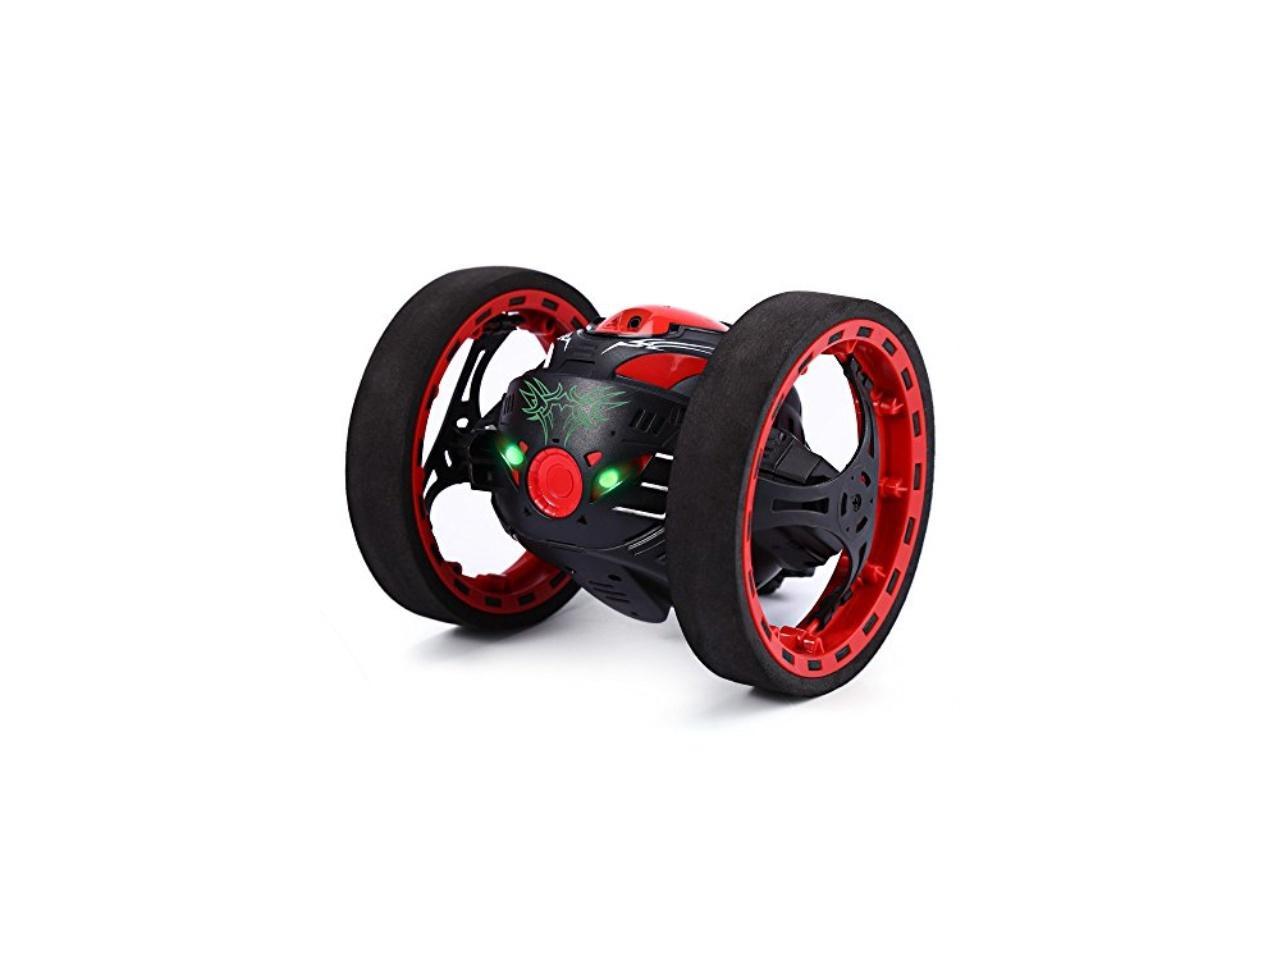 Black GBlife 2.4GHz Wireless Remote Control Jumping RC Toy Cars Bounce Car No WiFi for Kids 